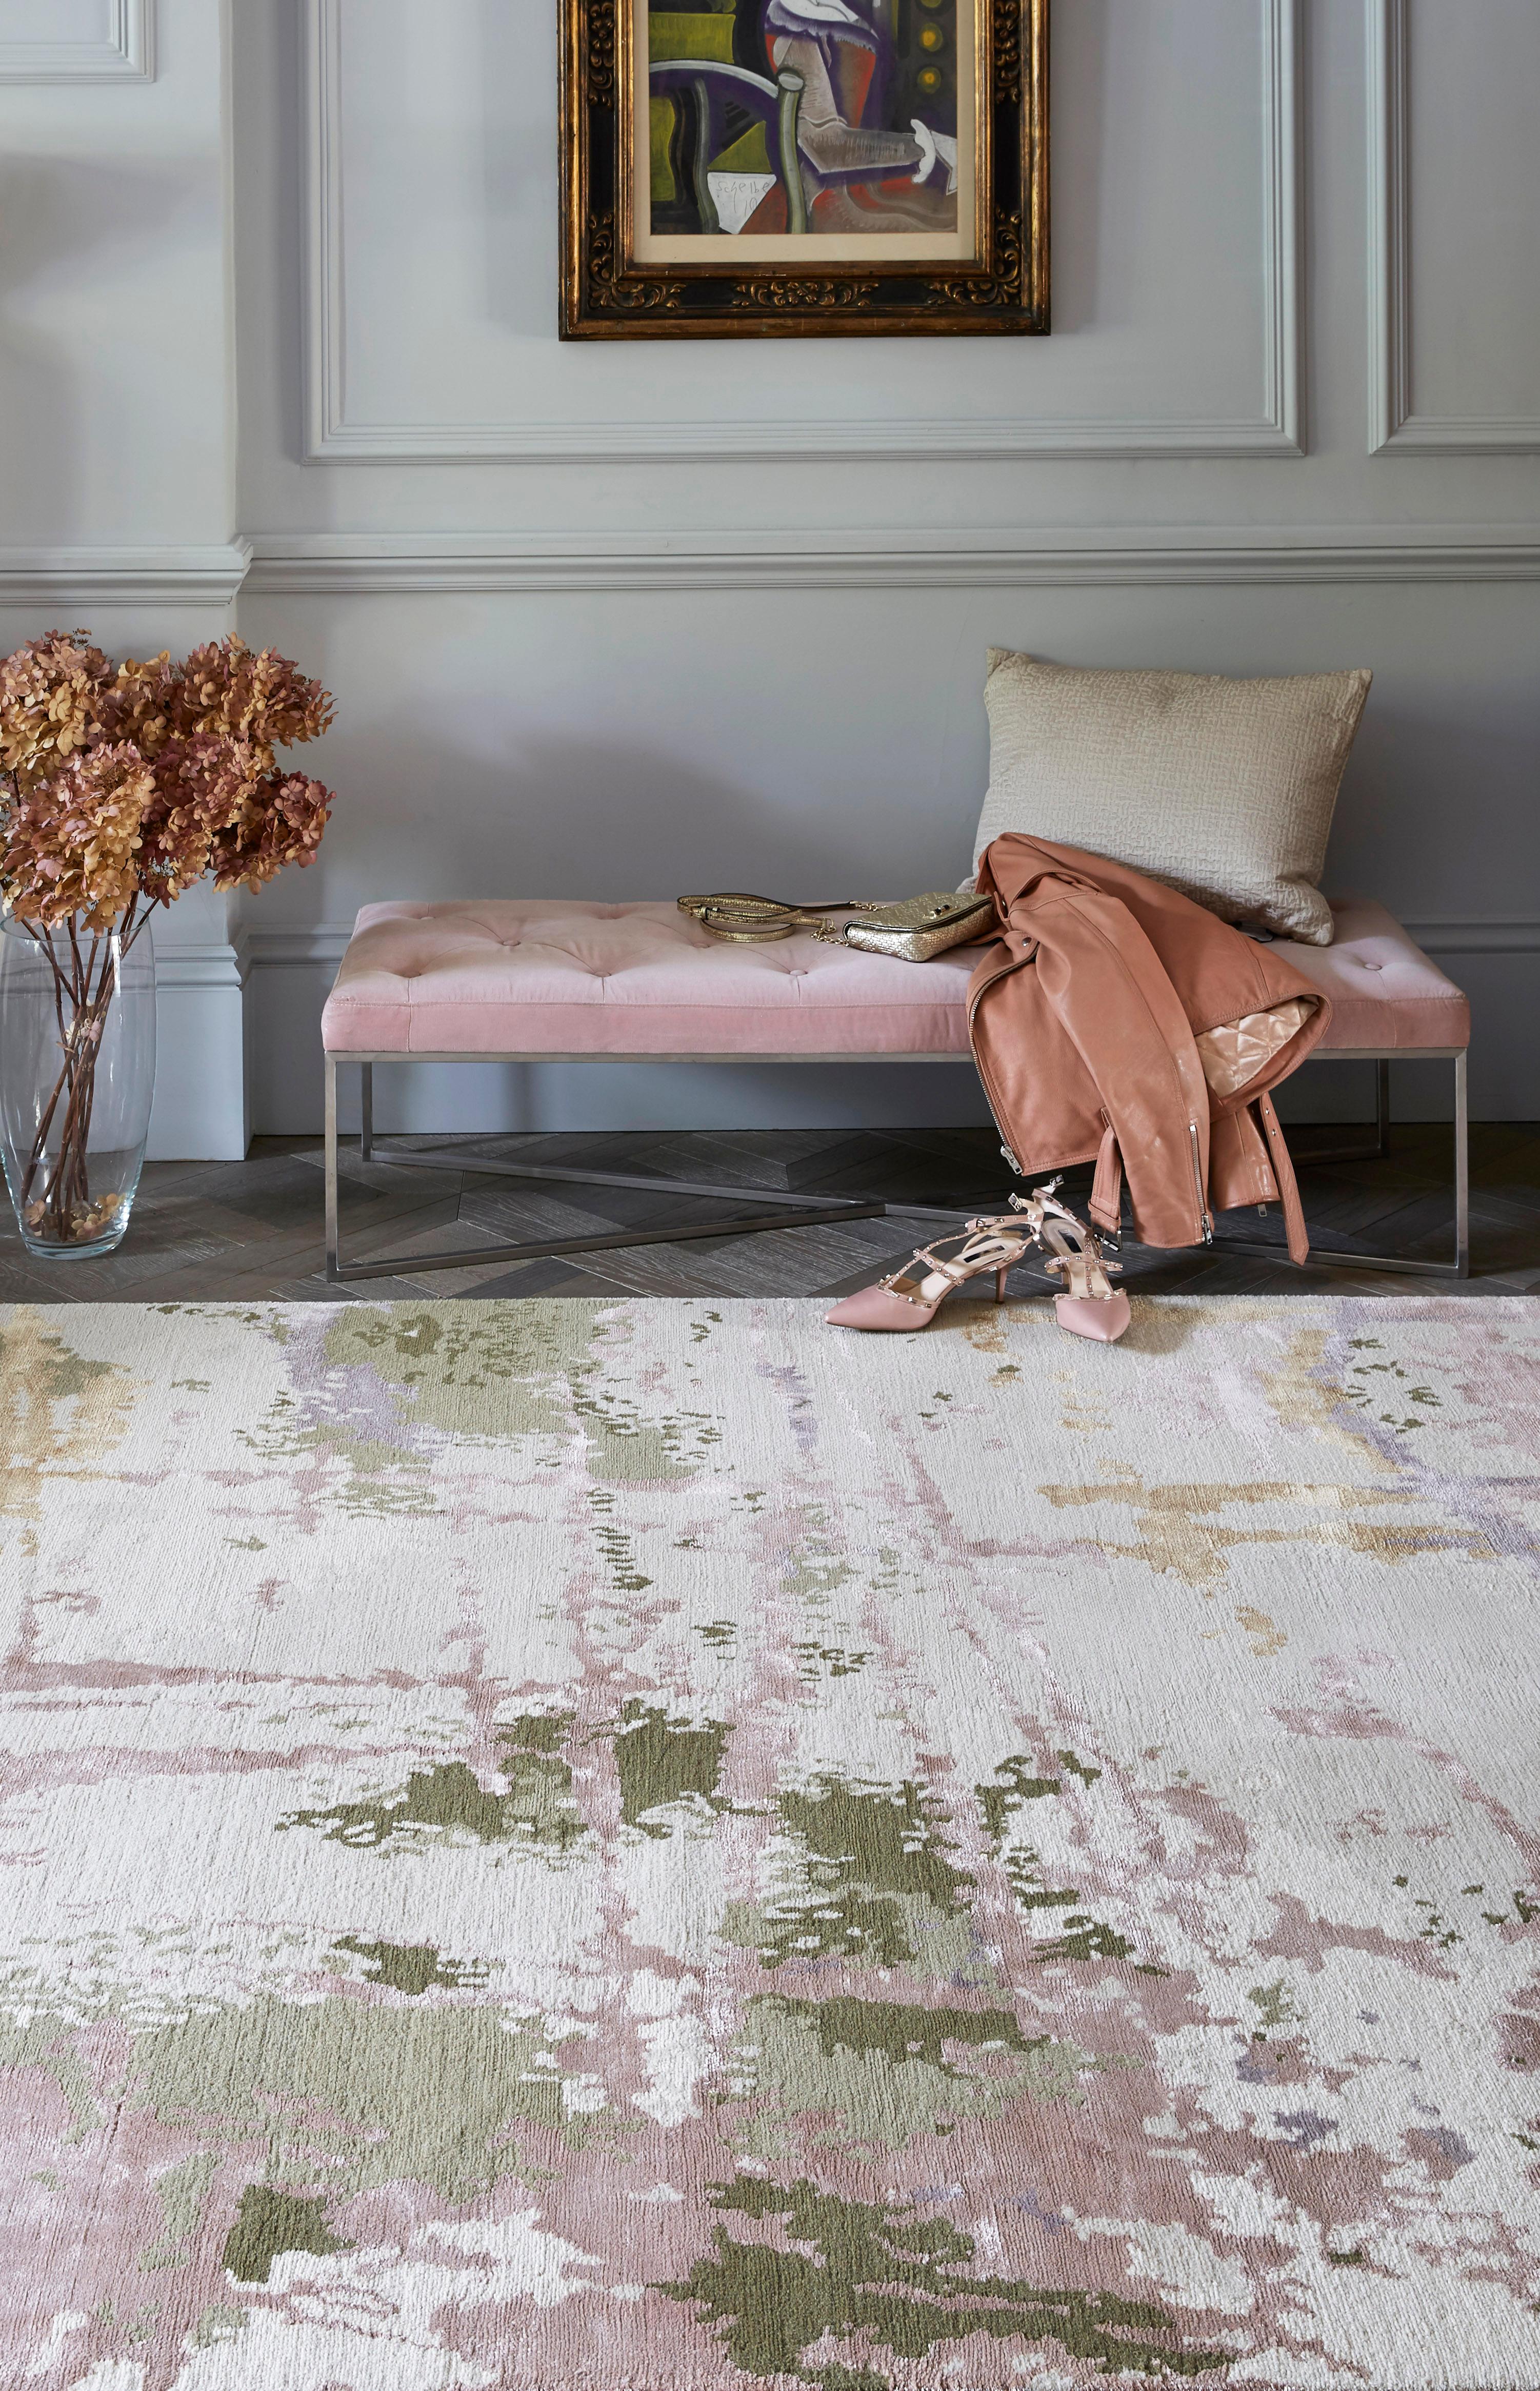 Soft tones arranged like brushstrokes was the inspiration behind our Abstract design. The effect imbues an elegant sophistication to any space while creating a soft layer of texture.

Hand-knotted Himalayan wool with bamboo silk (100 knots per